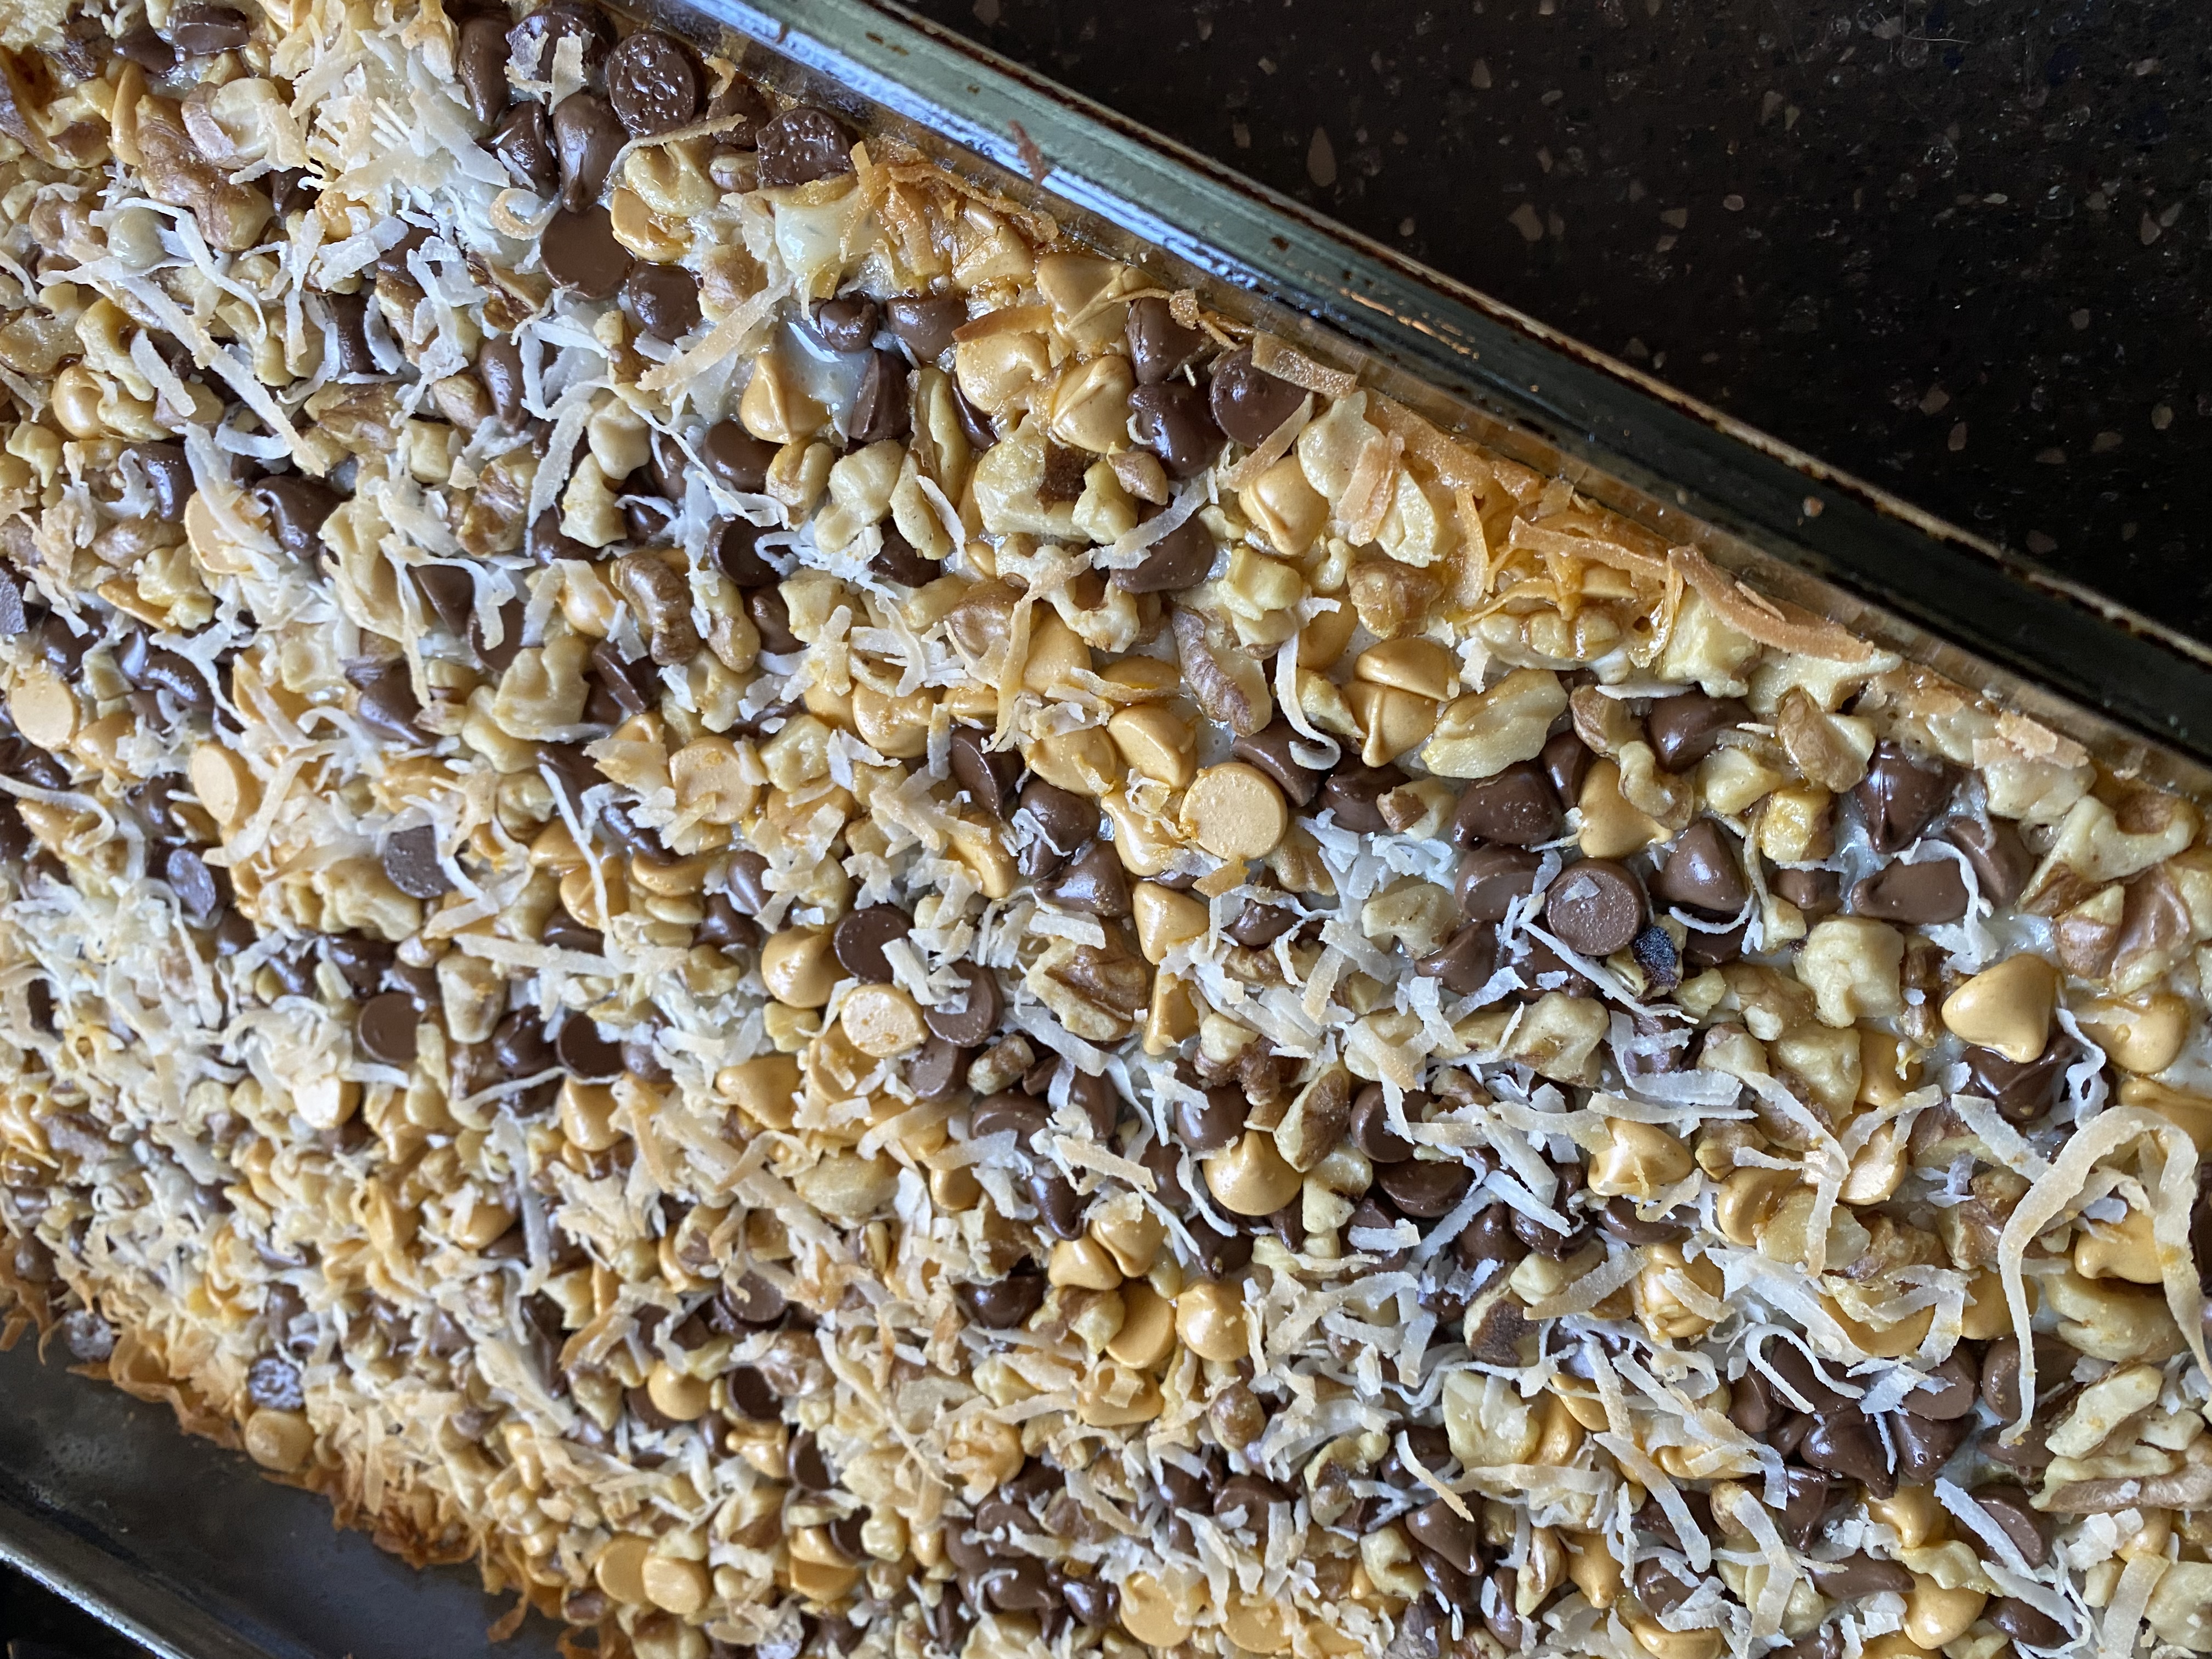 Magic Cookie Bars from EAGLE BRAND Allrecipes Member